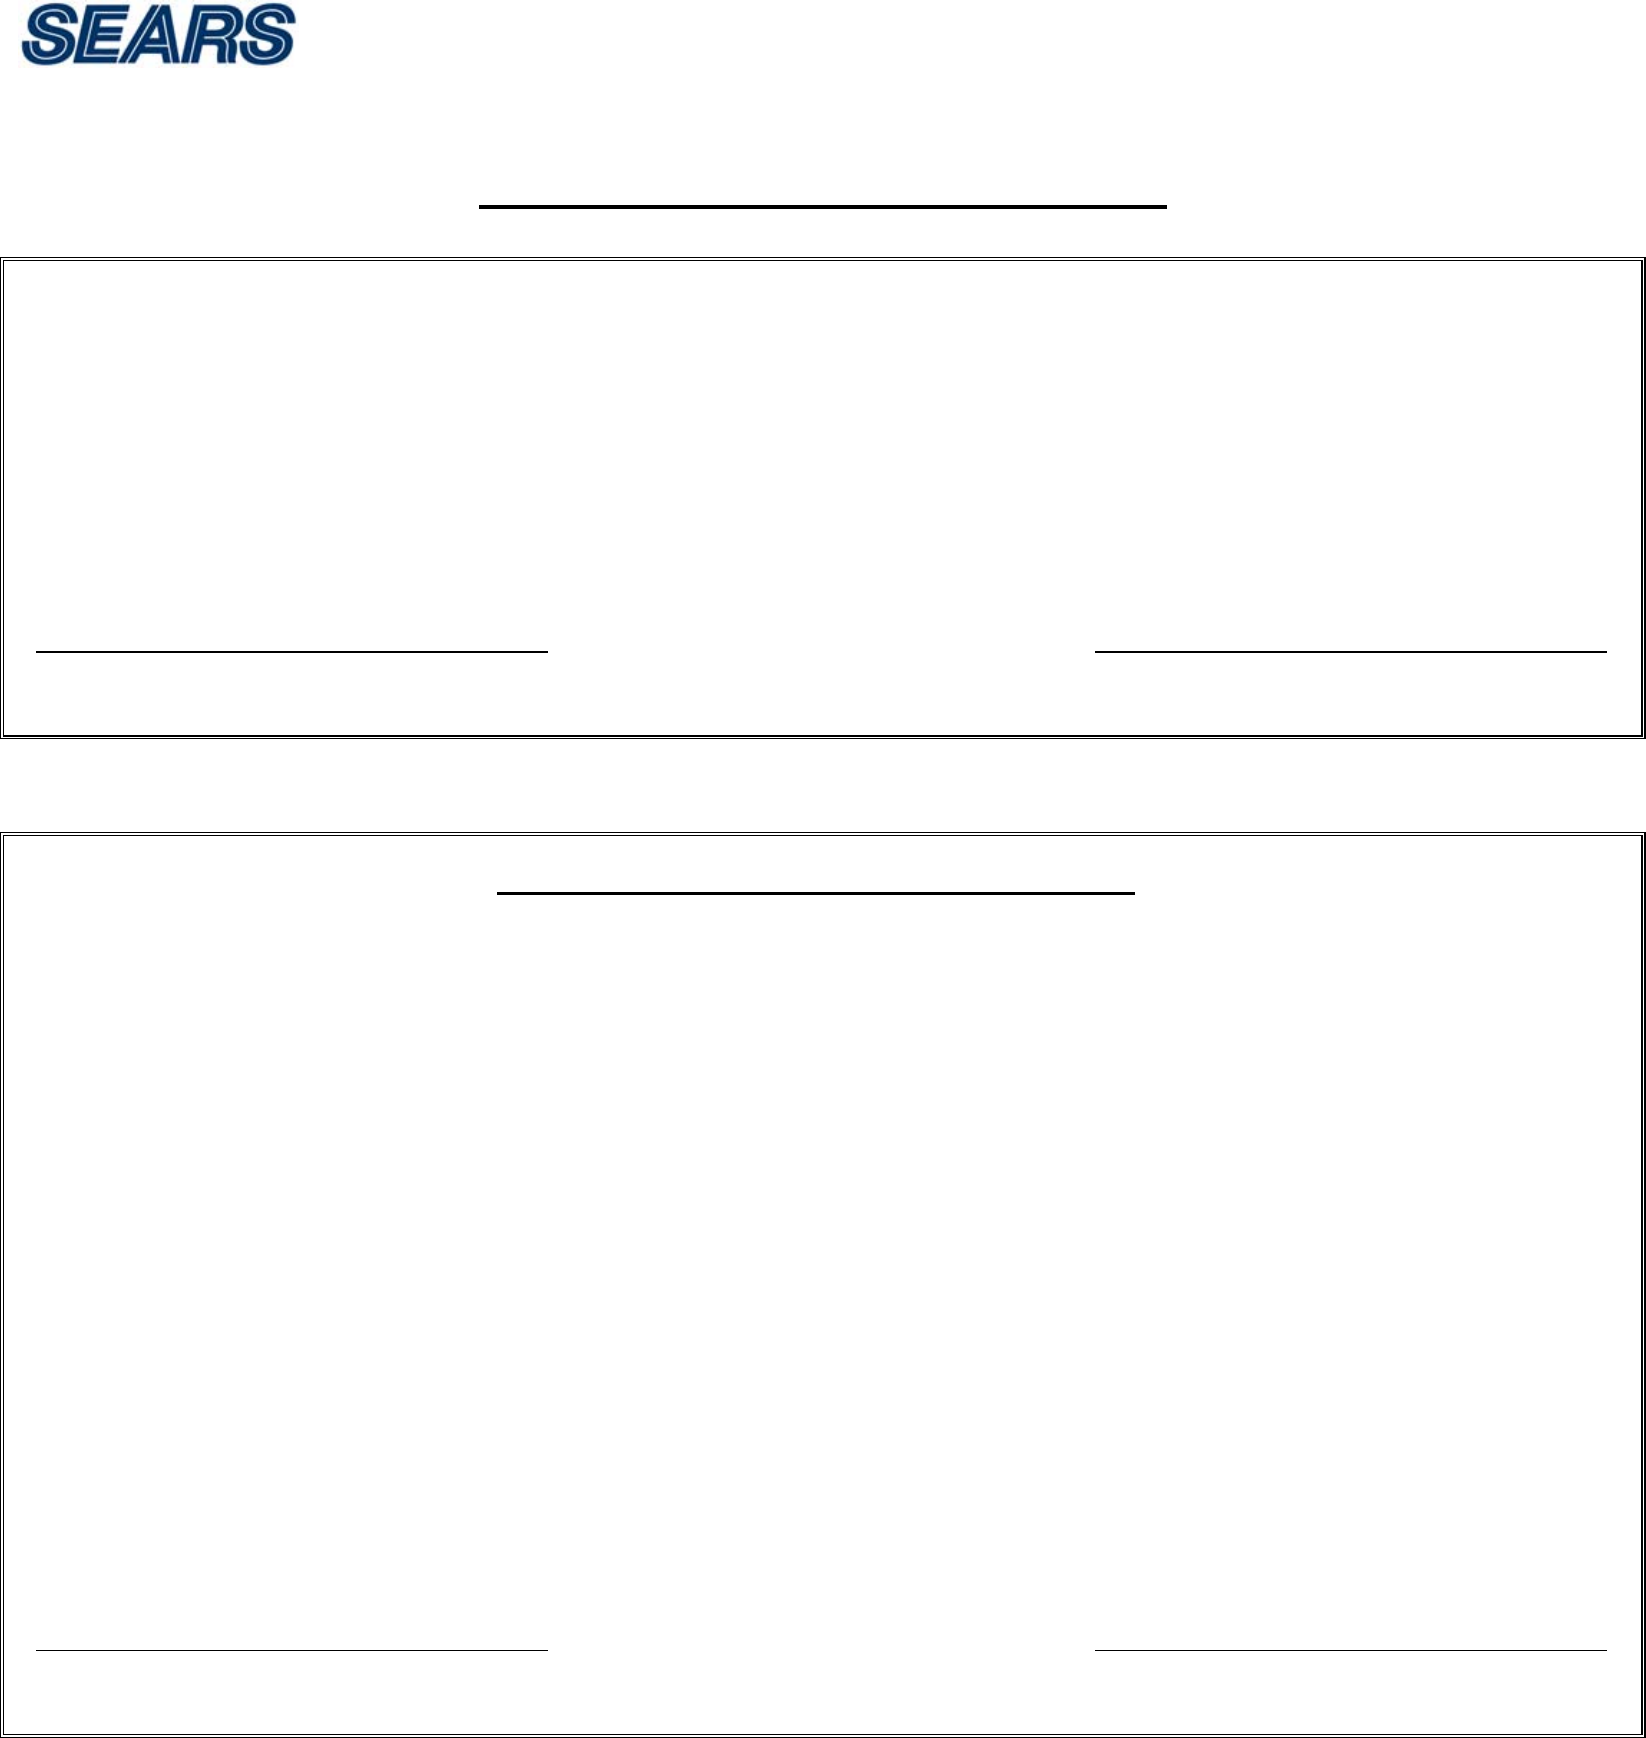 sears online employment application form